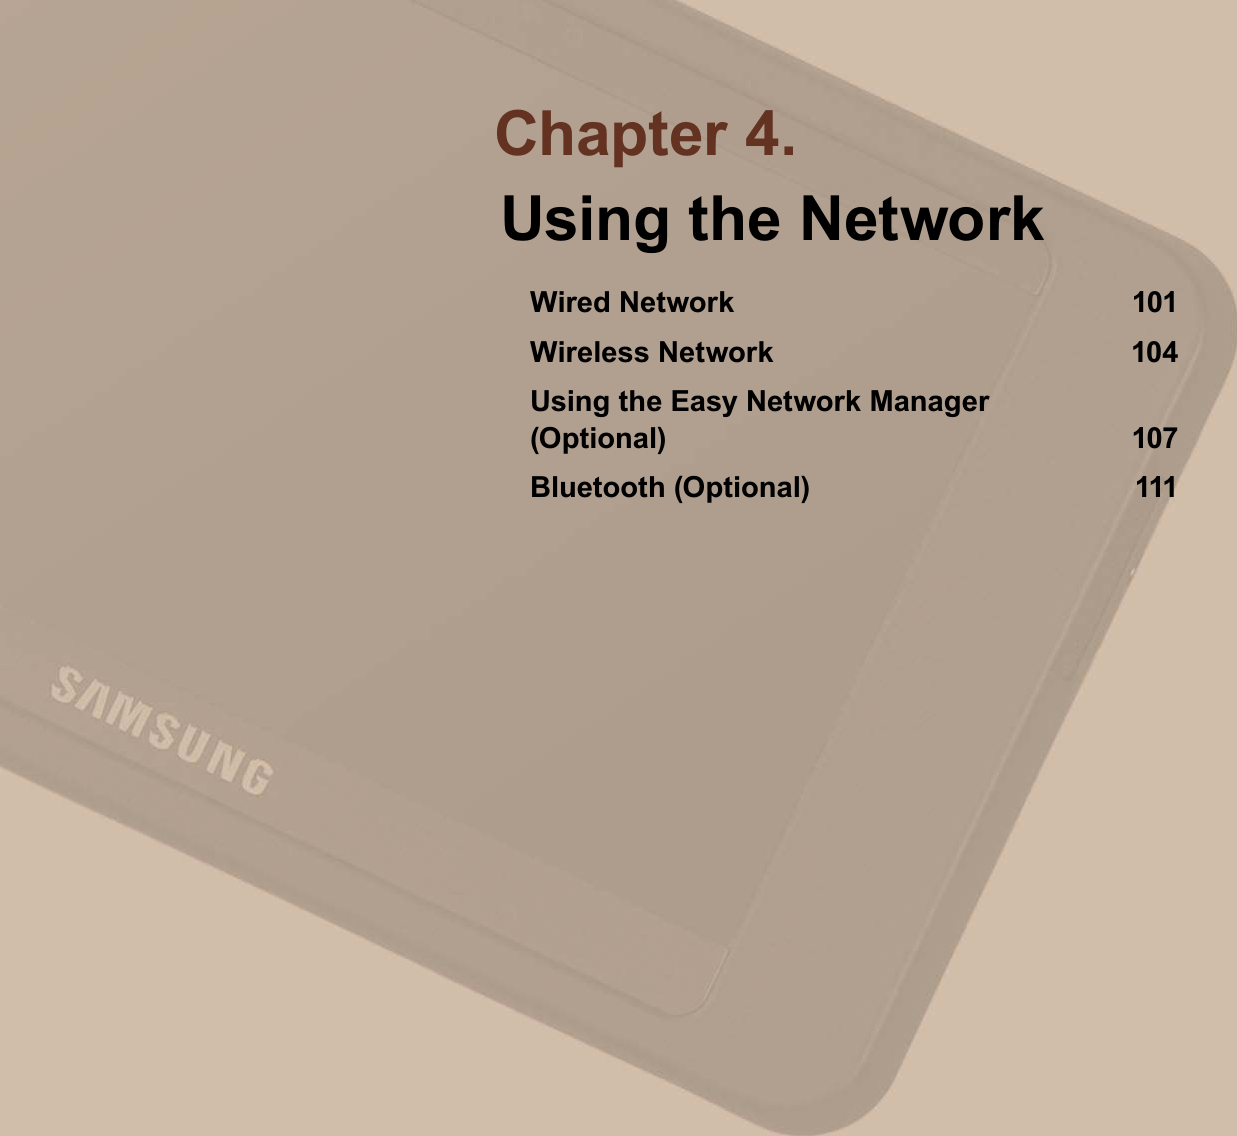 Using the NetworkWired Network 101Wireless Network 104Using the Easy Network Manager (Optional) 107Bluetooth (Optional) 111Chapter 4.